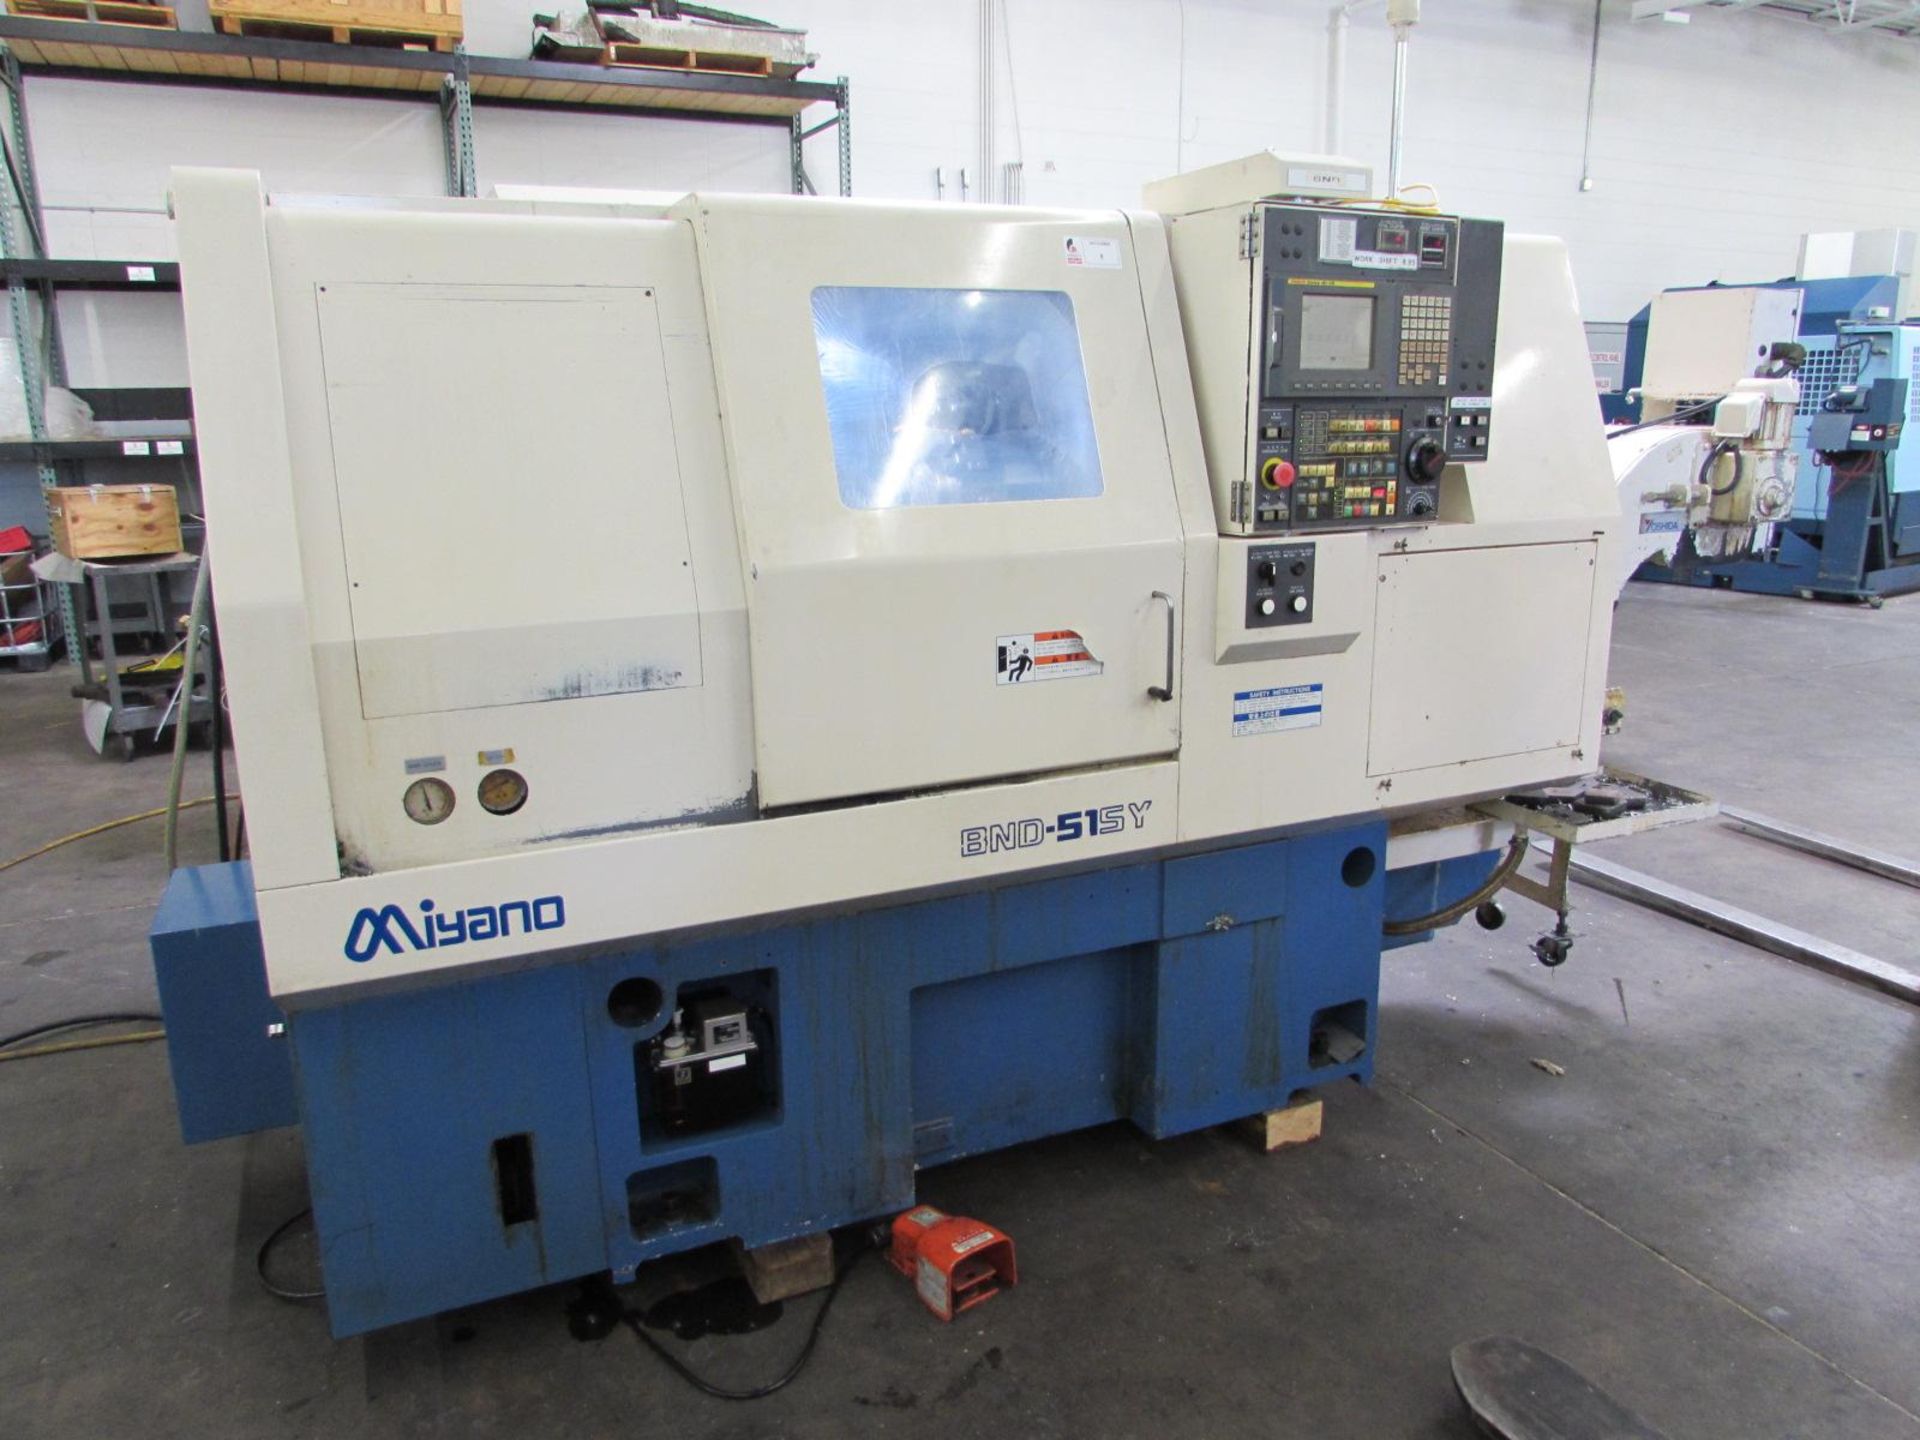 2" Miyano BND-51SY CNC Turning Center Lathe, Y-Axis, S/N 2WX85340, New 2004